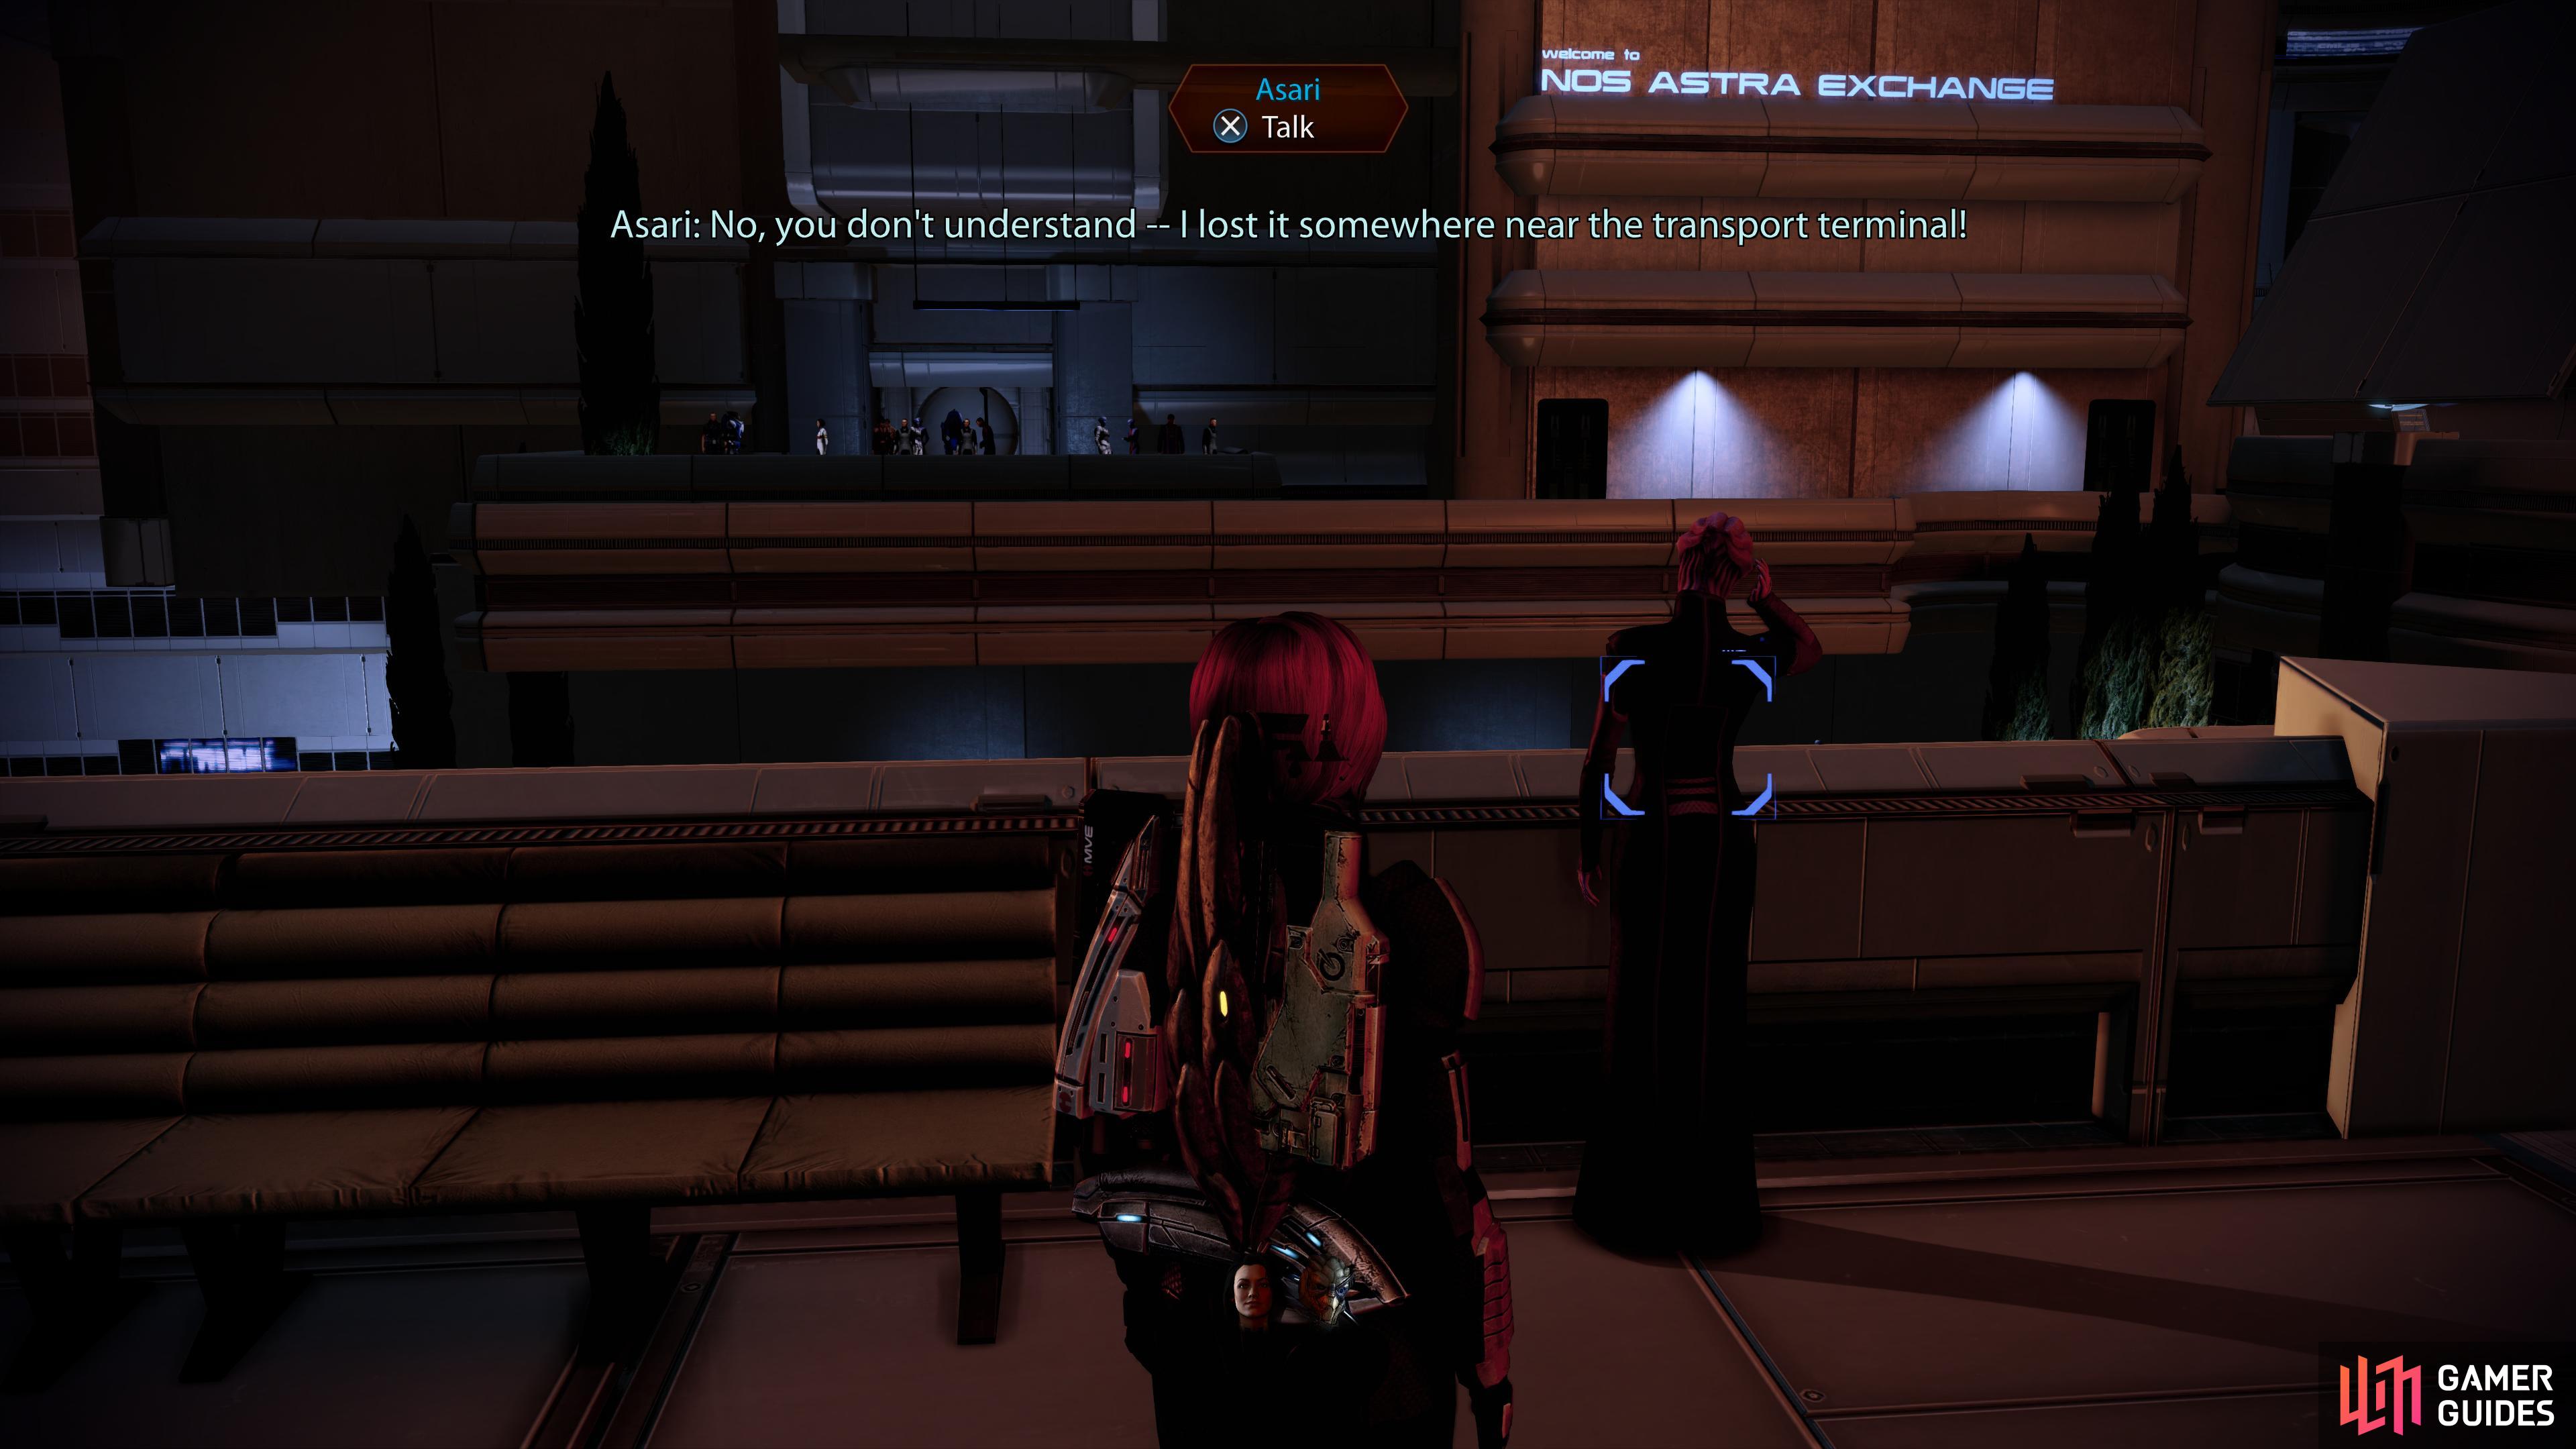 If you've started Miranda's loyalty mission, you can overhear an asari complaining about a missing trinket.